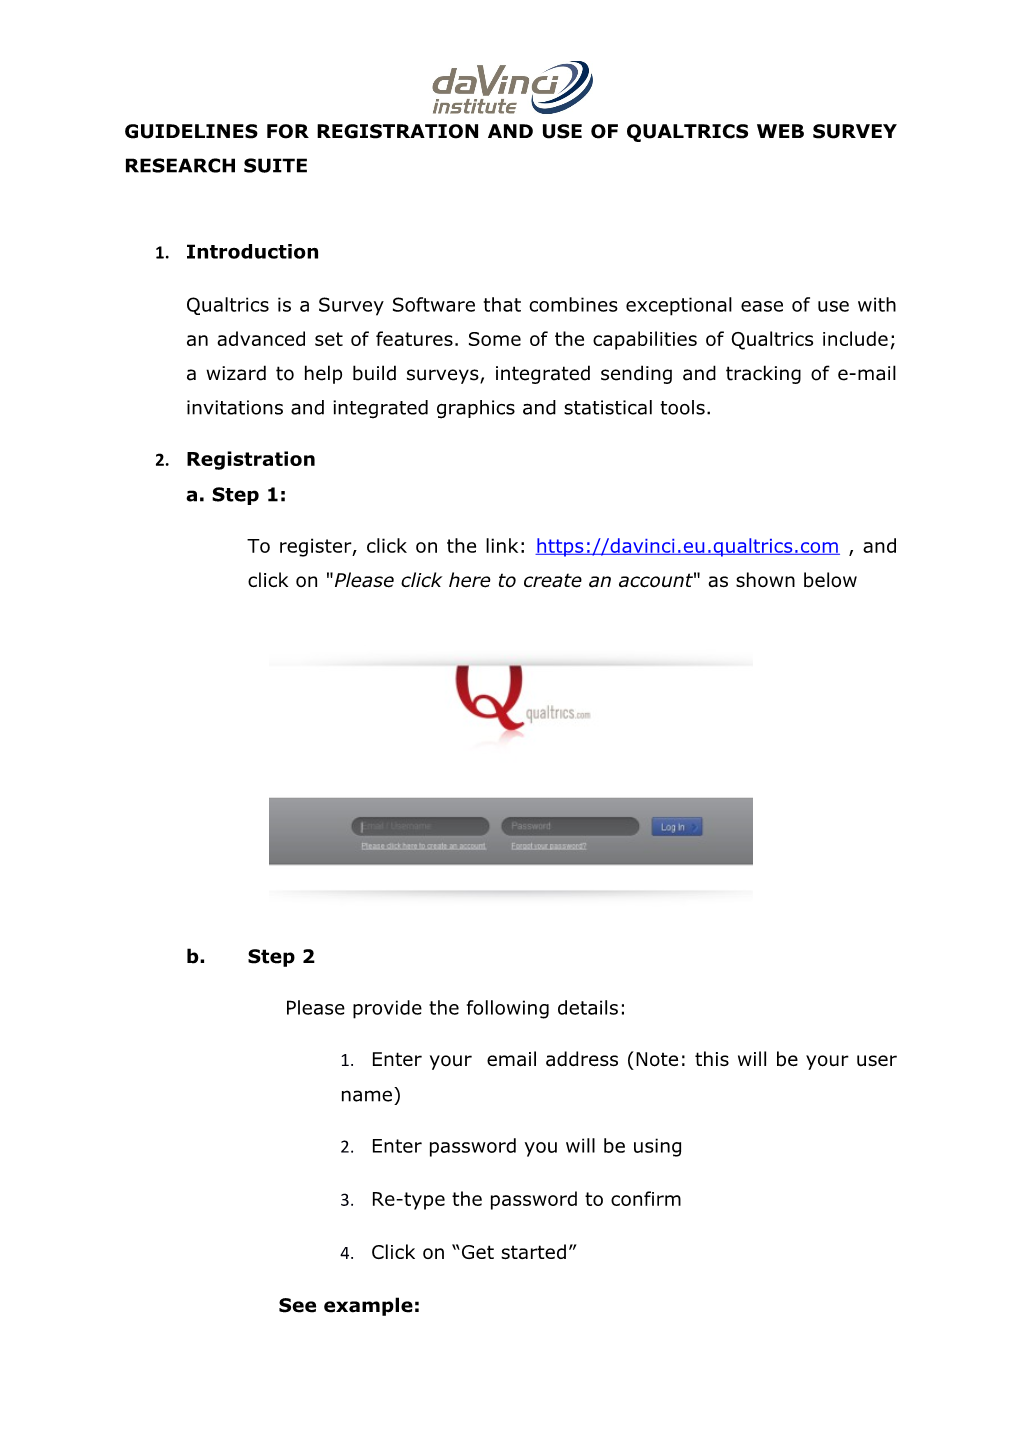 Guidelines for Registration and Use of Qualtrics Web Survey Research Suite